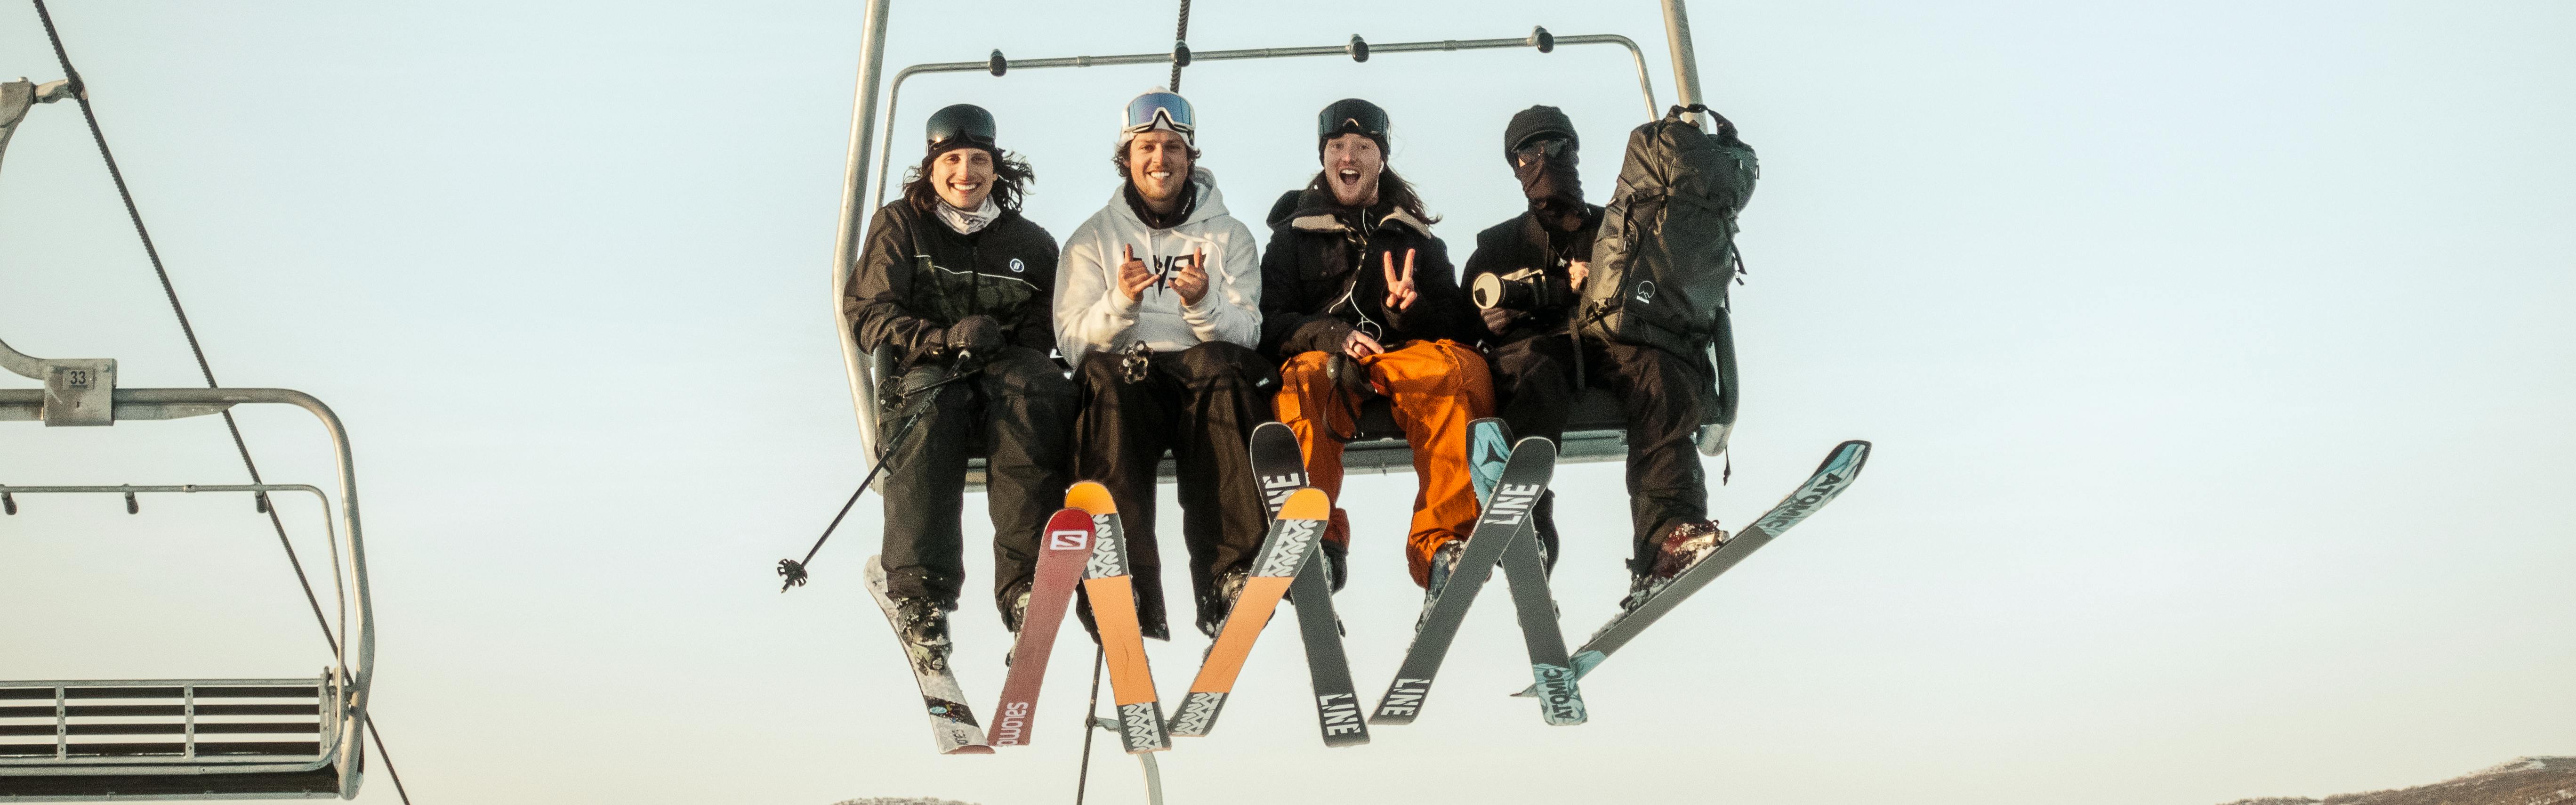 Four skiers on a chairlift all wearing different skis. 